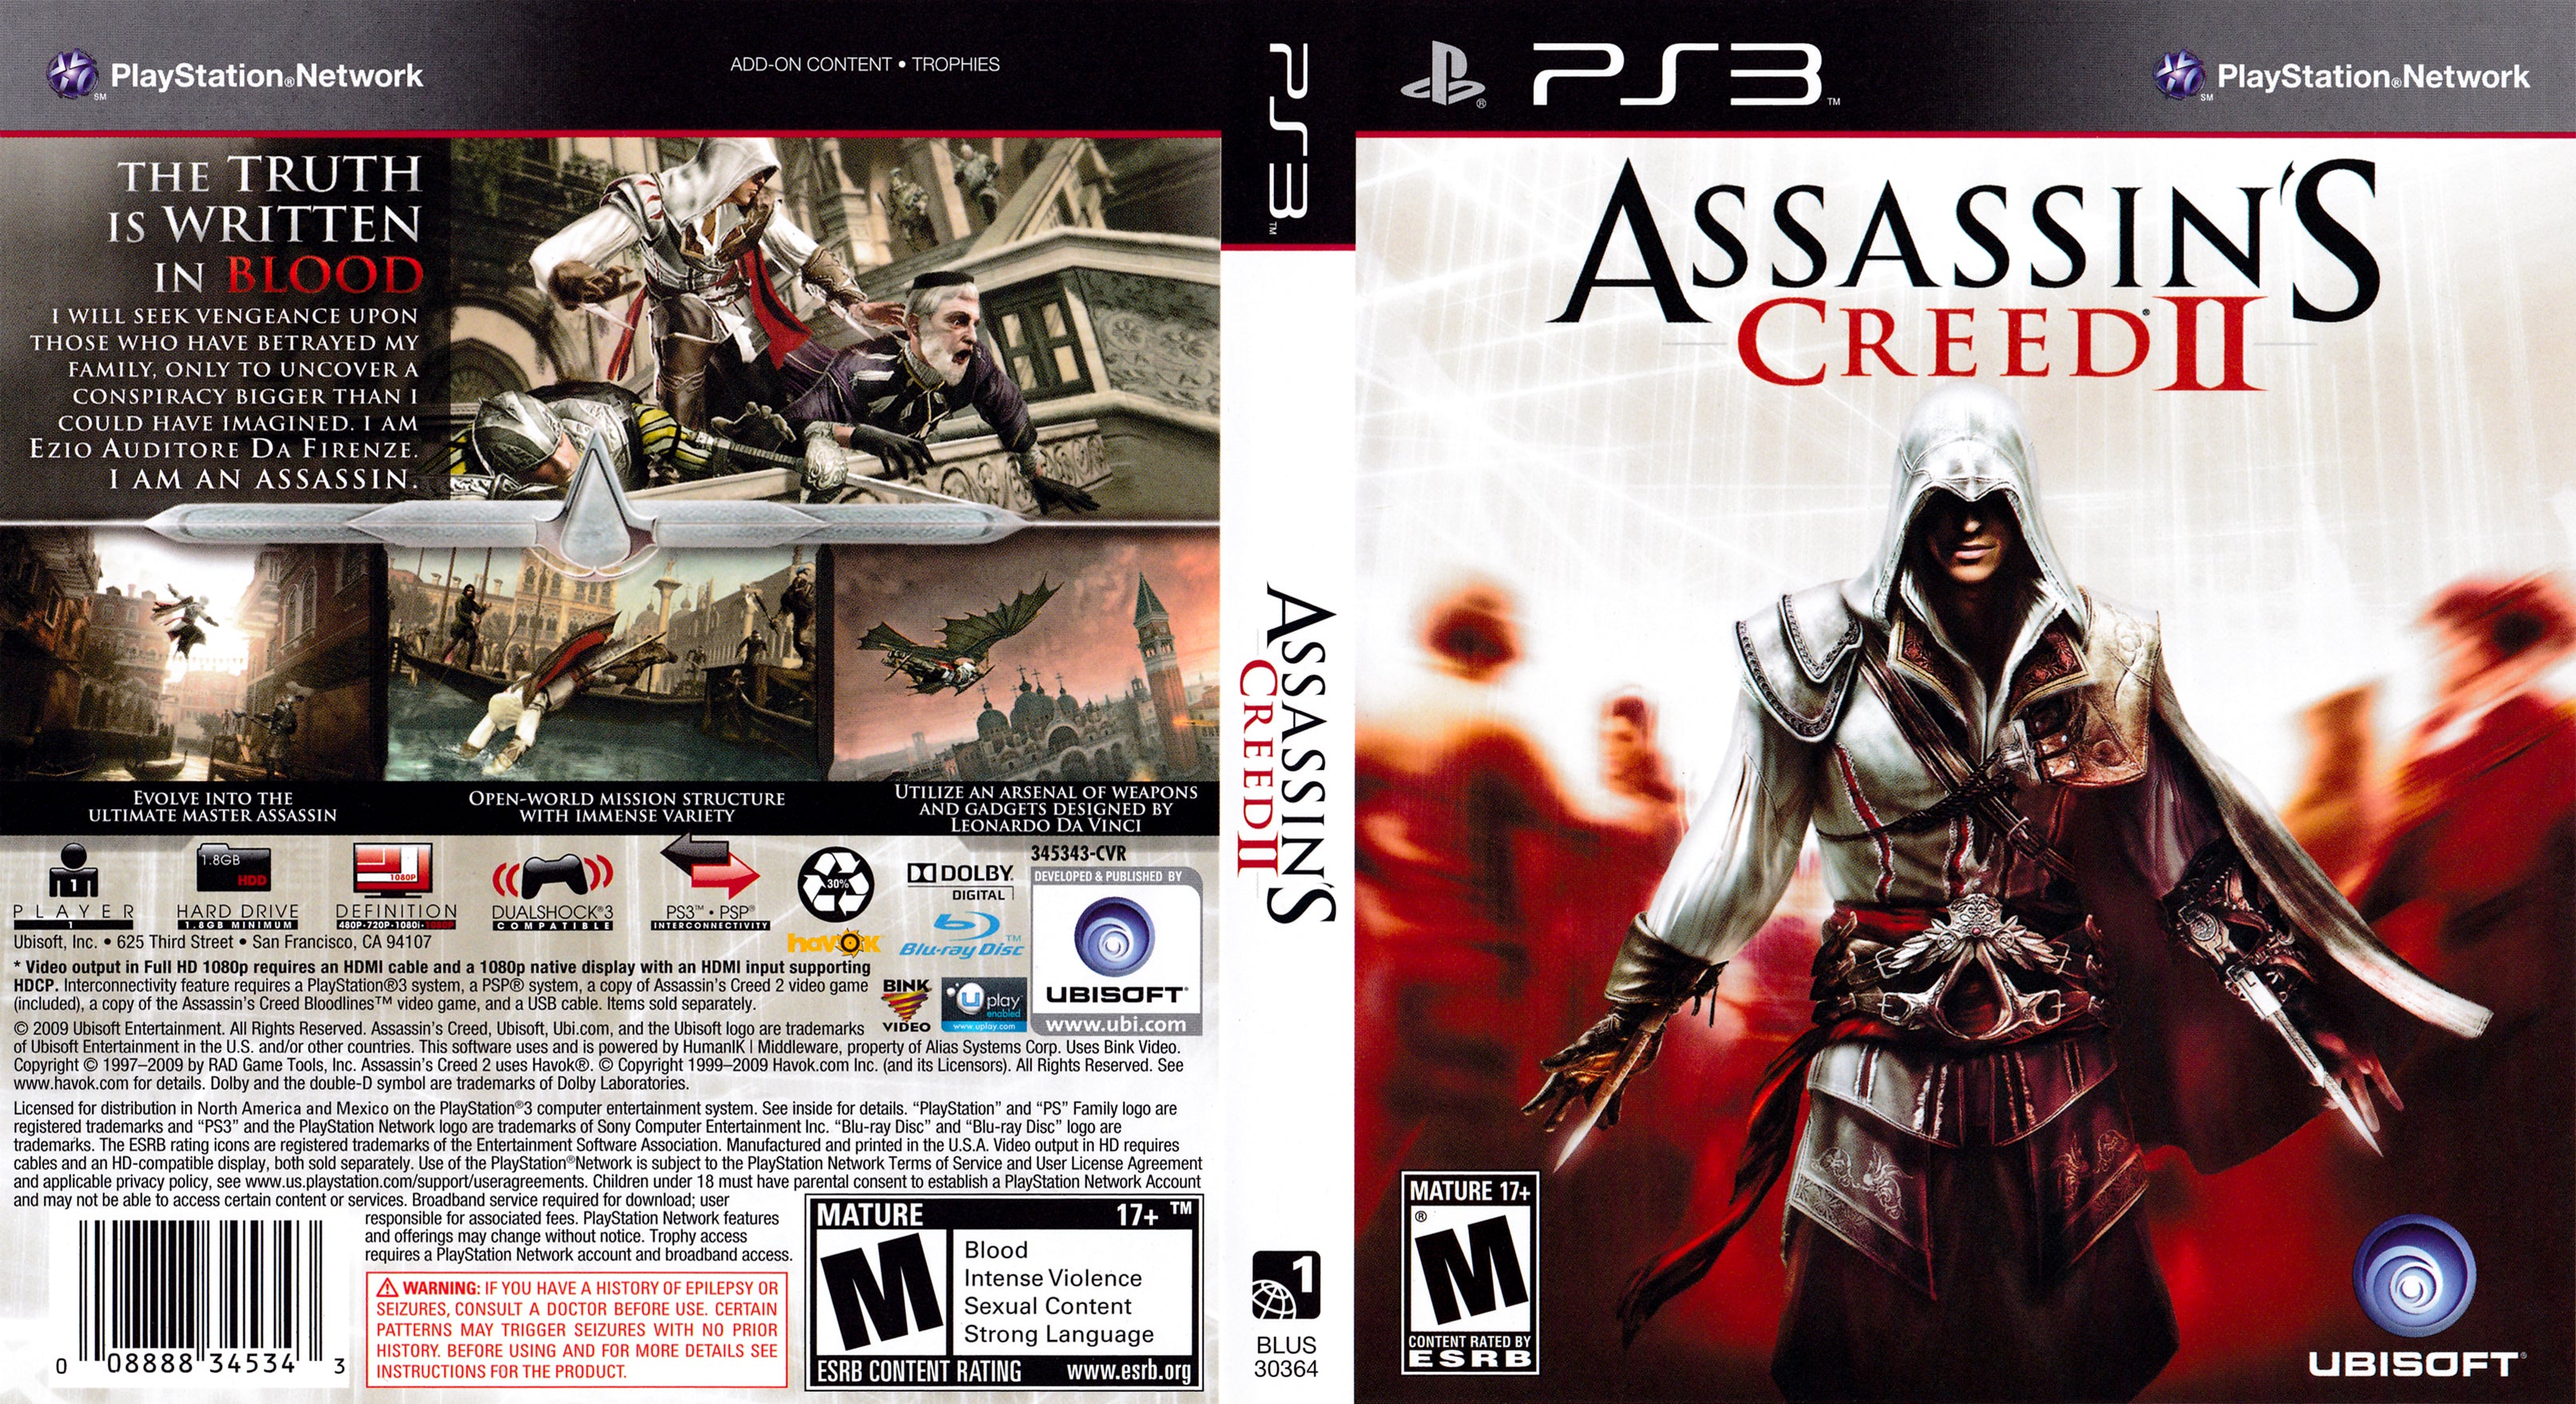  Assassin's Creed 1 & 2 - Ubisoft Double Pack (PS3) : Video Games